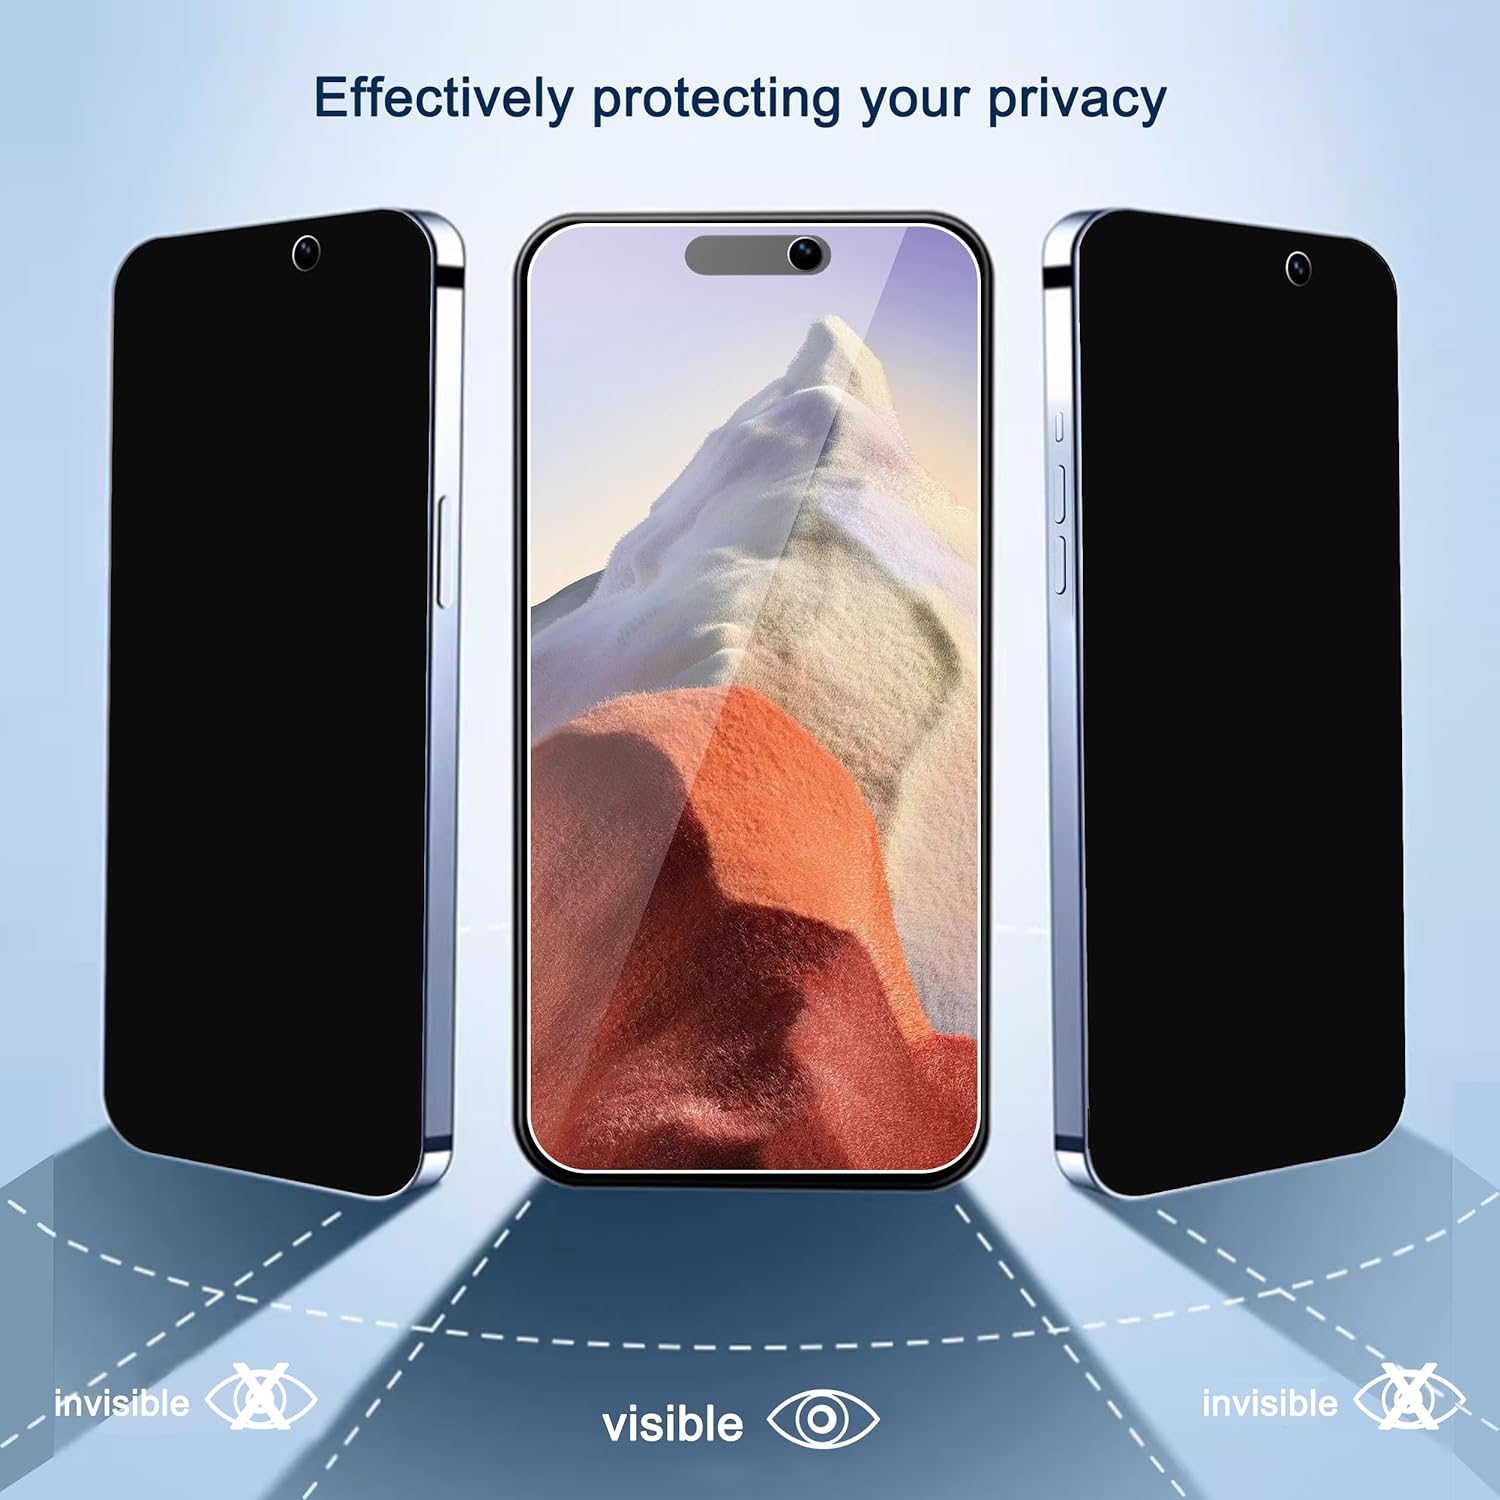 Ailun 3 Pack Privacy Screen Protector for iPhone 15 [6.1 inch] + 3 Pack Camera Lens Protector, Anti Spy Private Tempered Glass Film, Case Friendly, [9H Hardness] - HD [Black] [6 Pack]